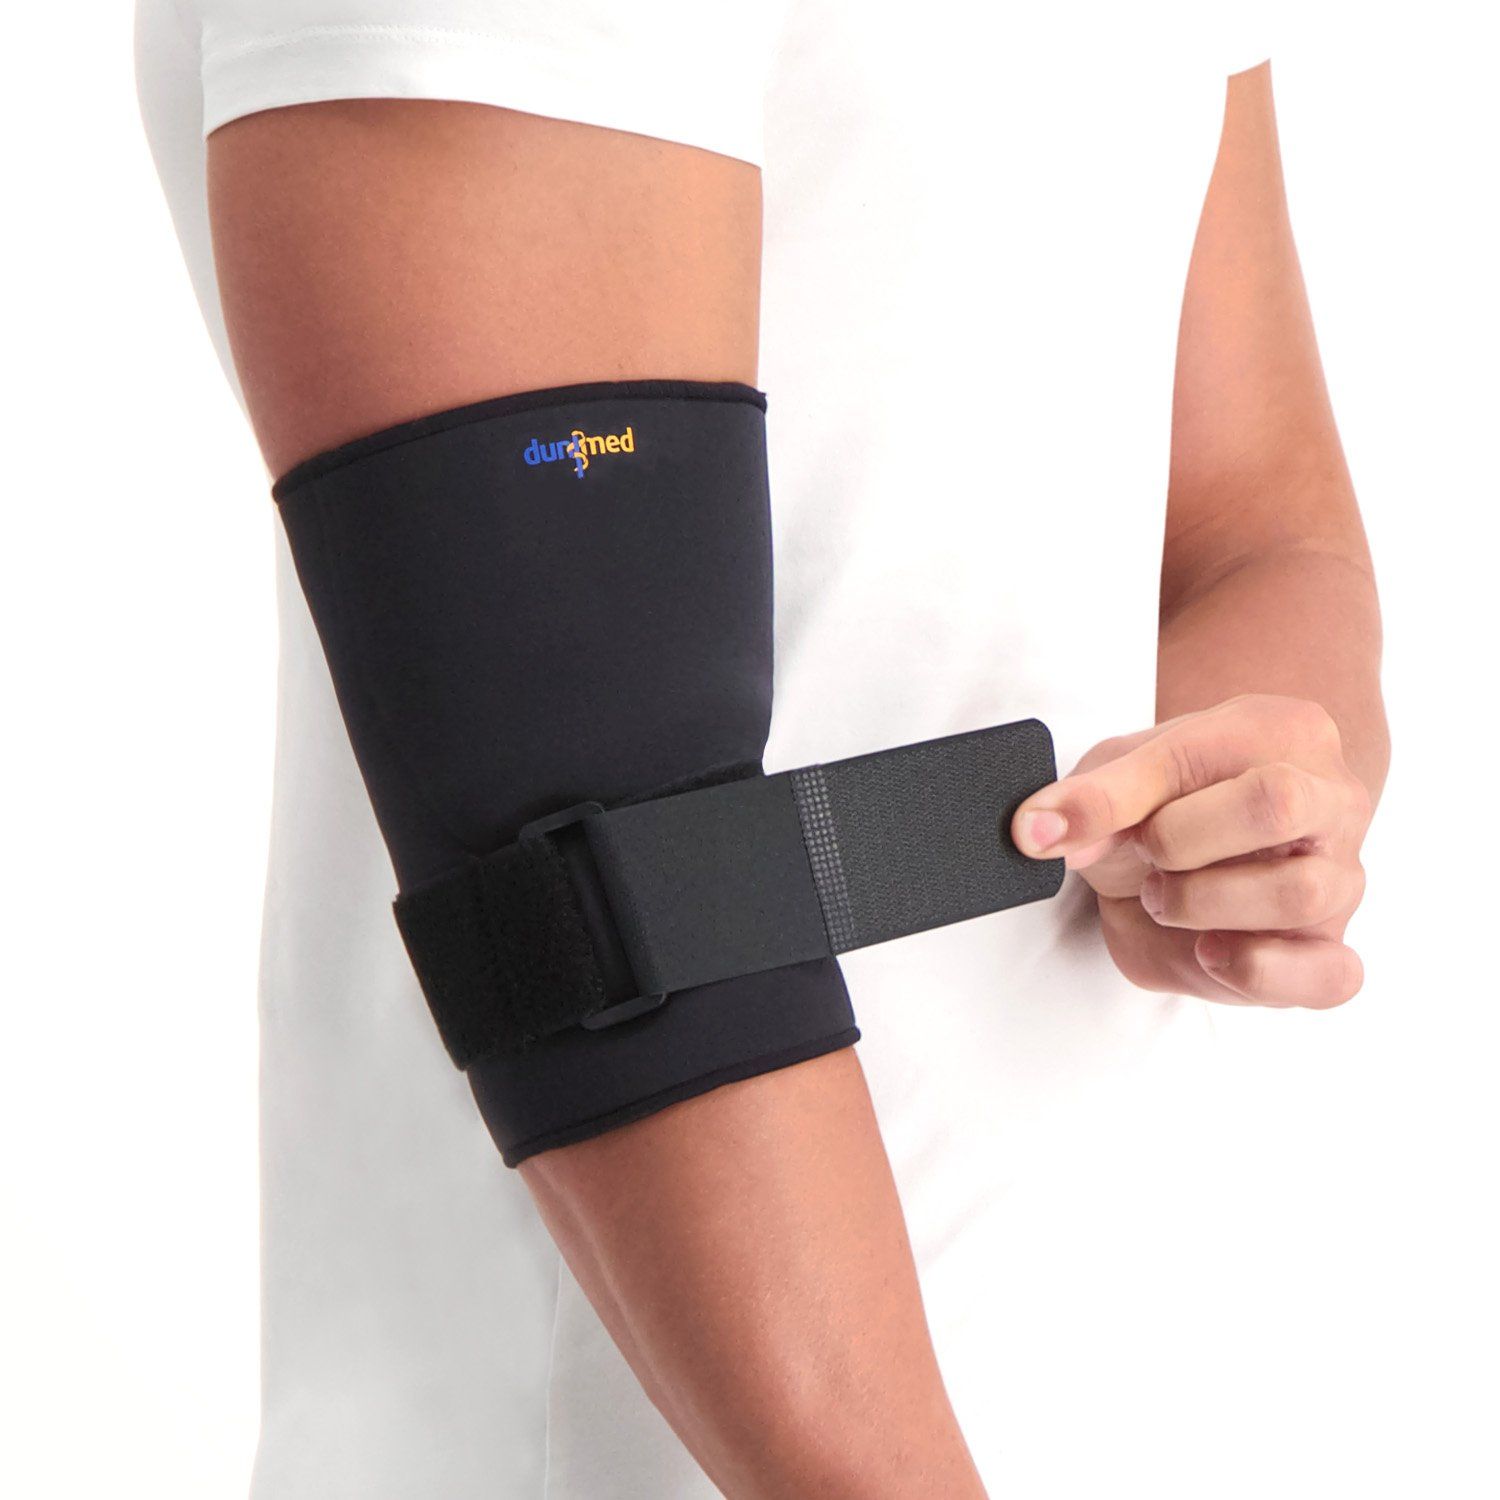 Dunimed elbow support product information